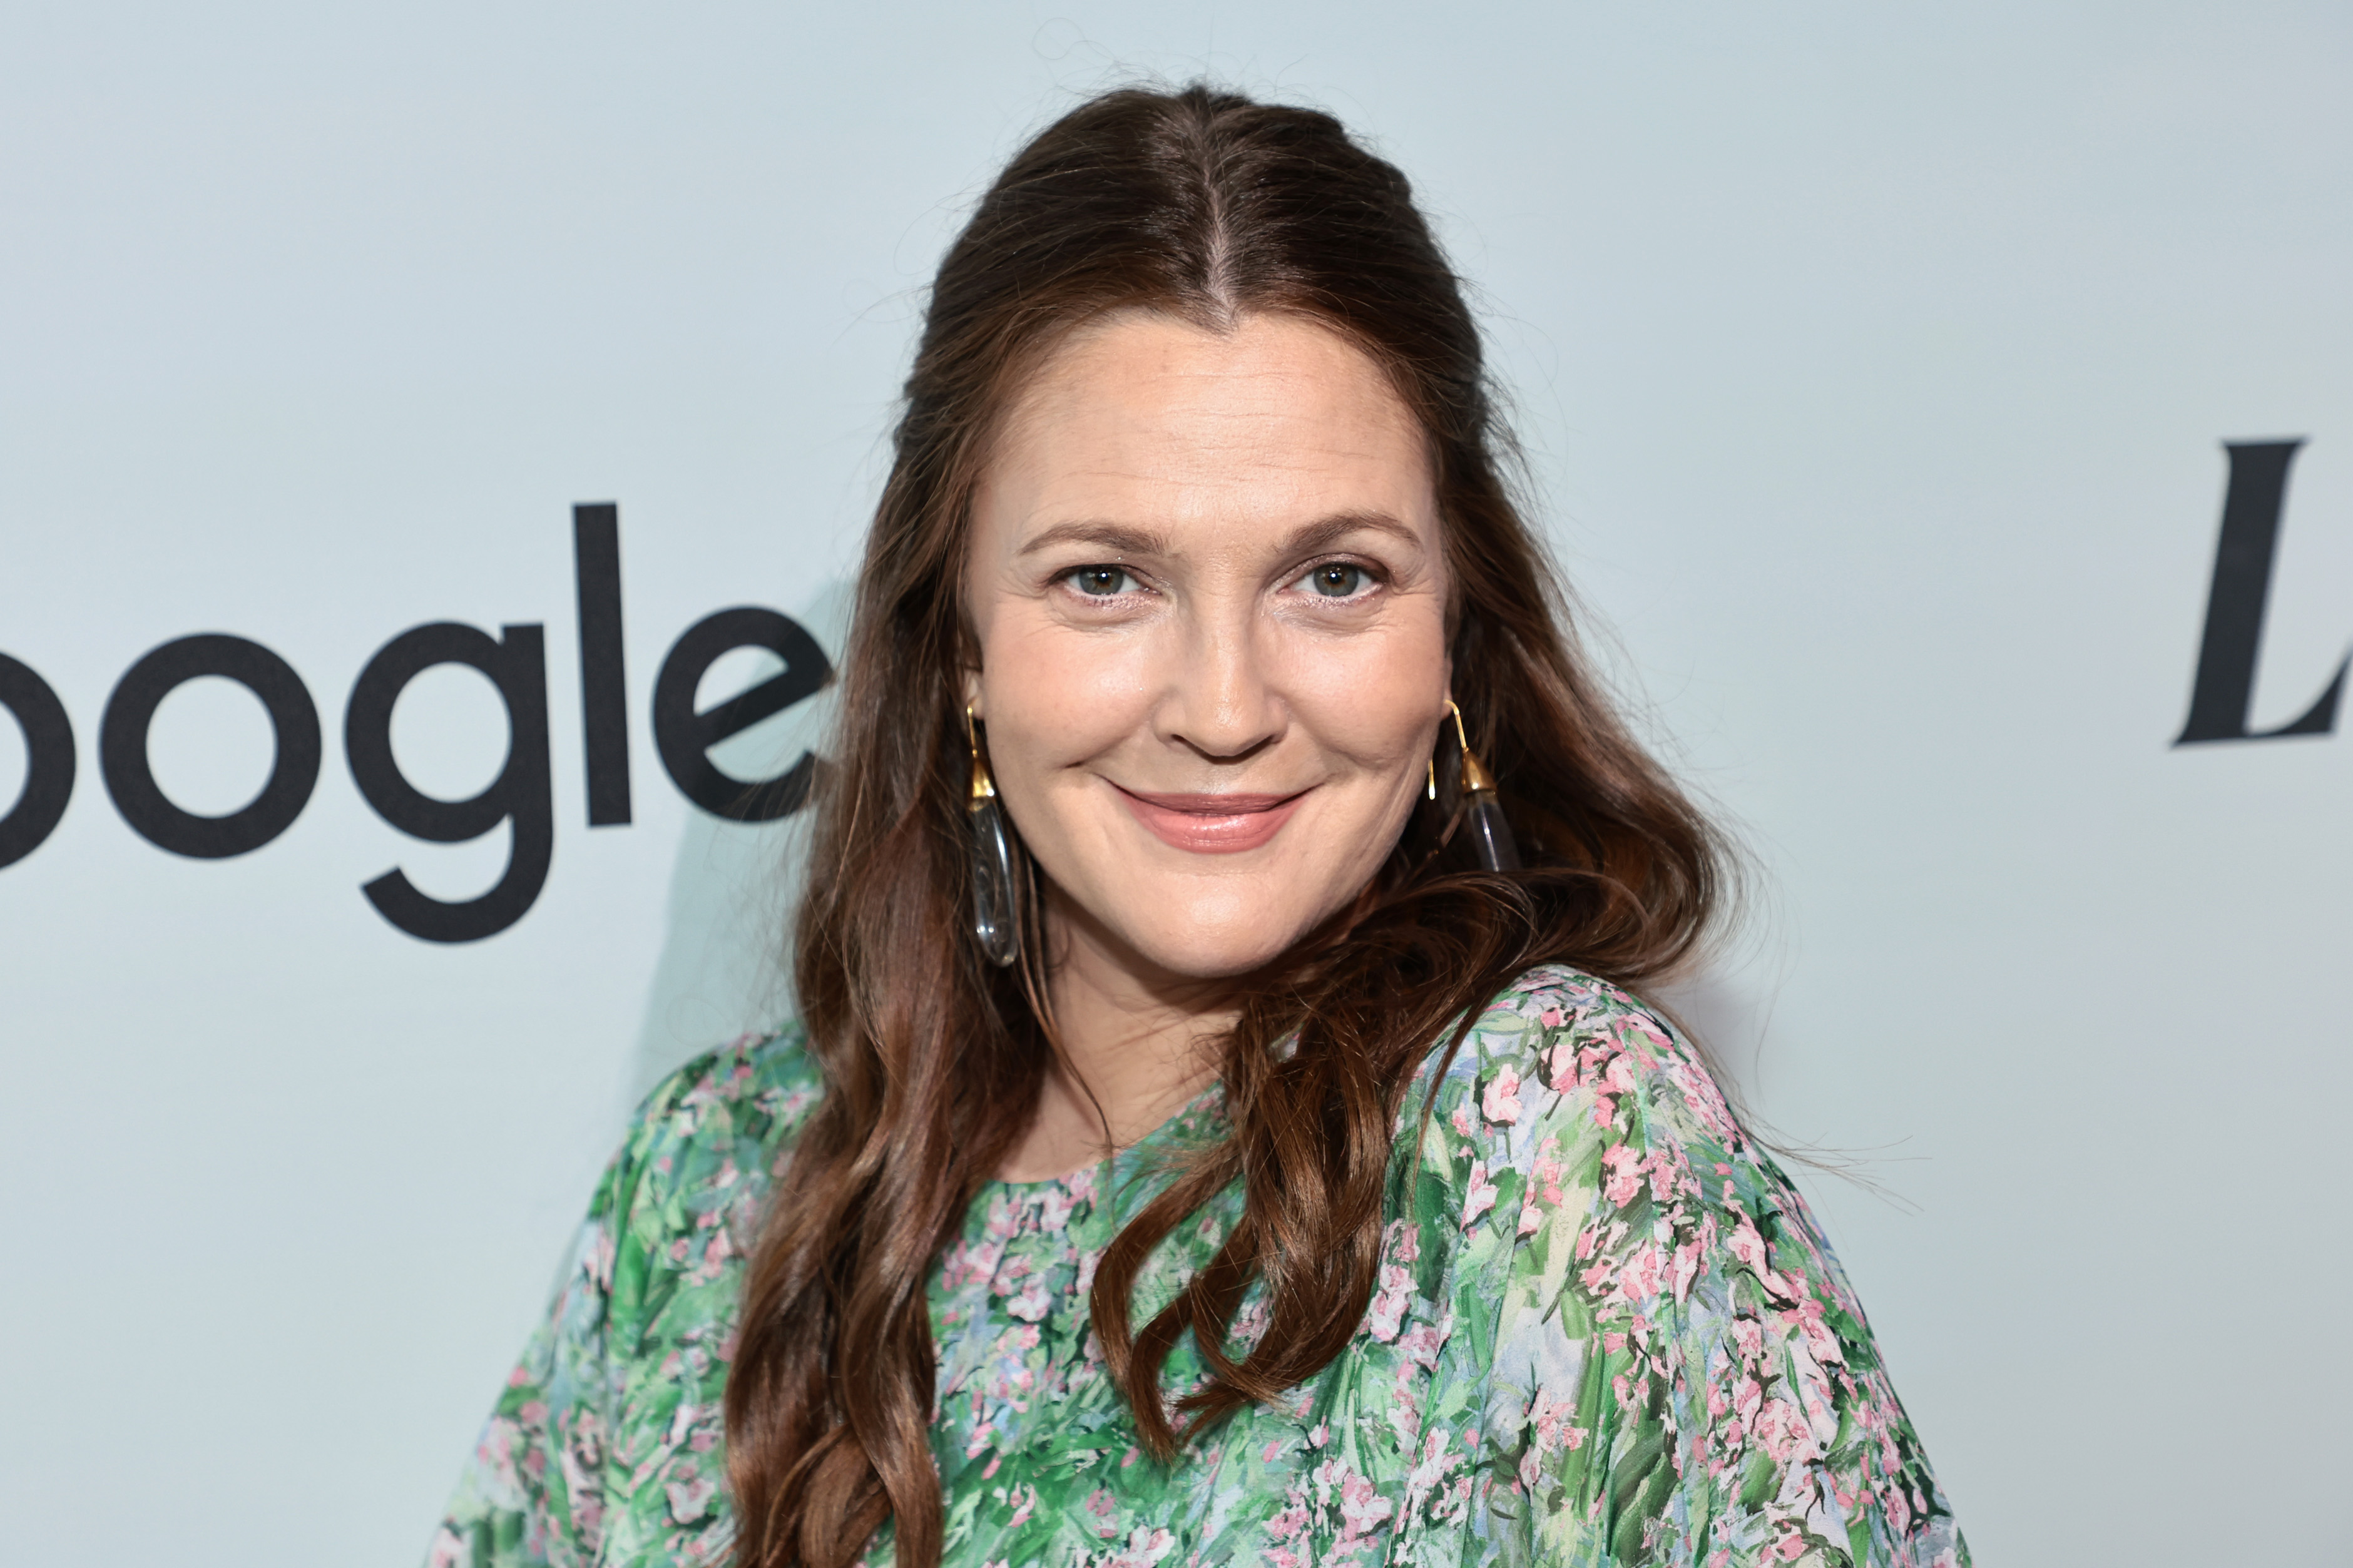 Drew Barrymore's Pizza Salad Recipe Has Foodies Totally Divided